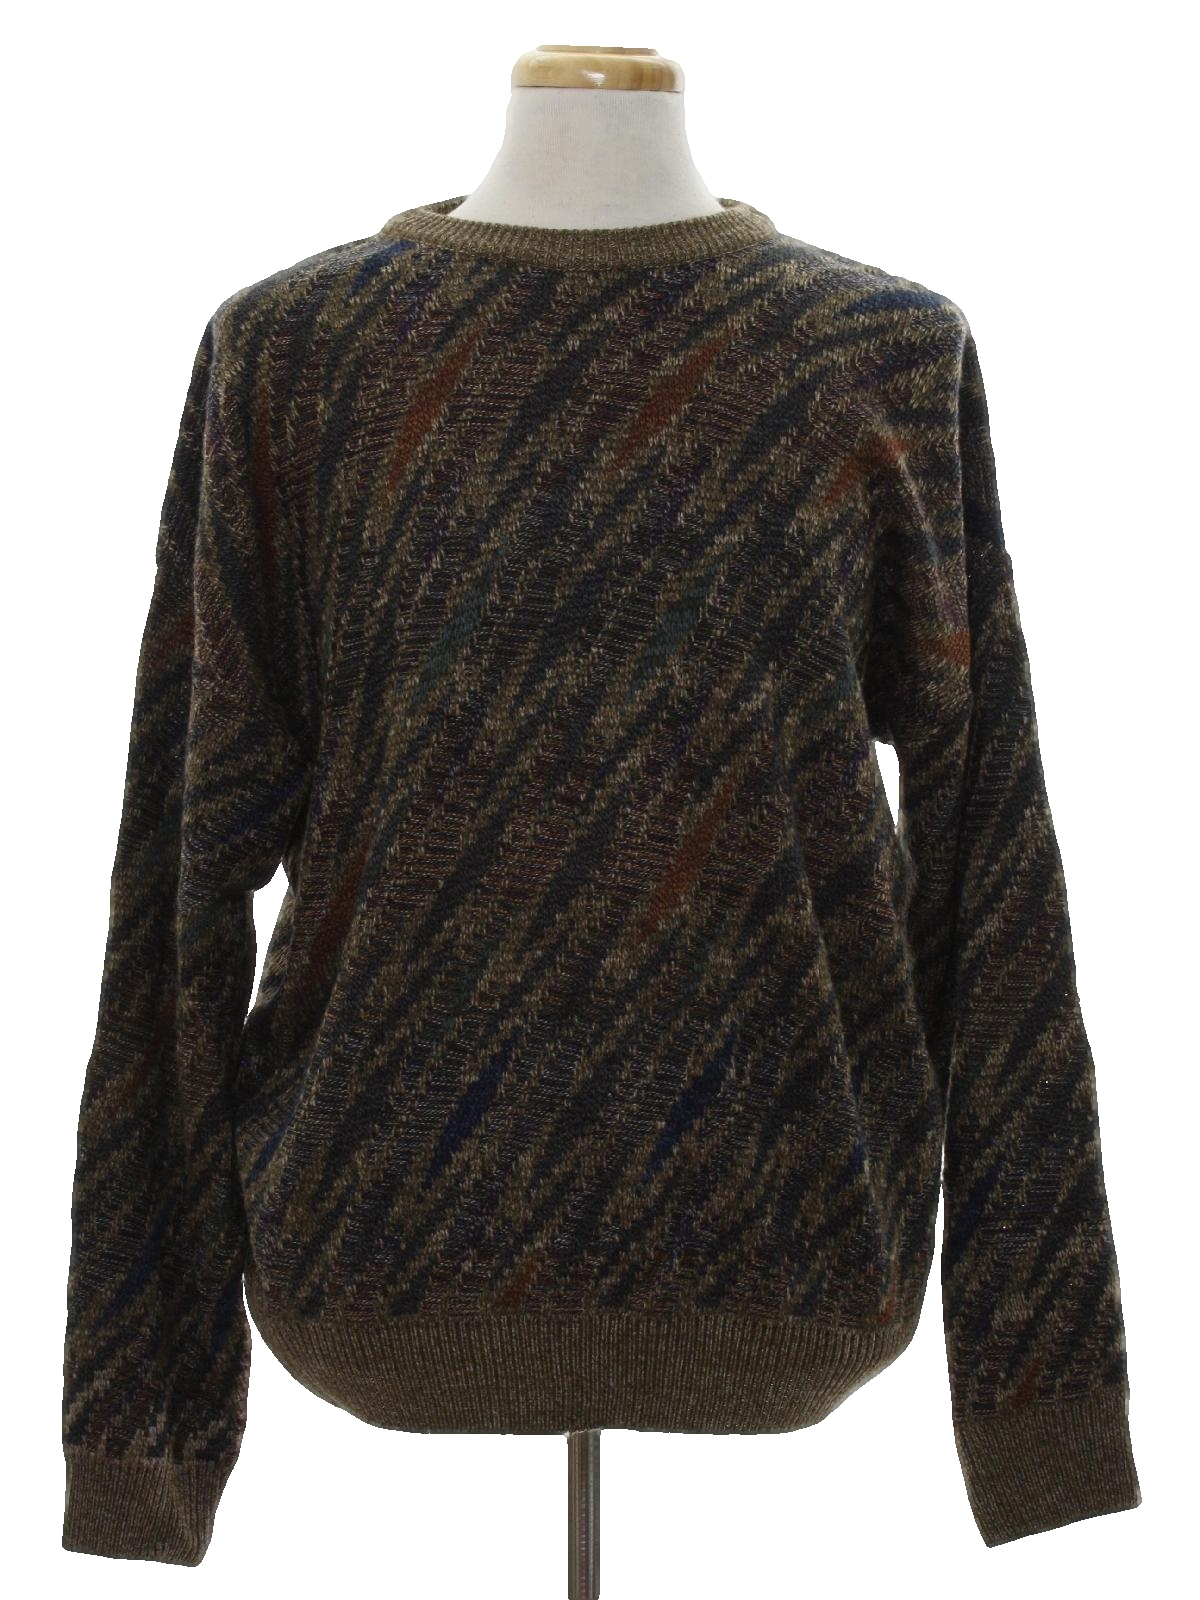 Towncraft 1980s Vintage Sweater: 80s -Towncraft- Mens heathered tan ...